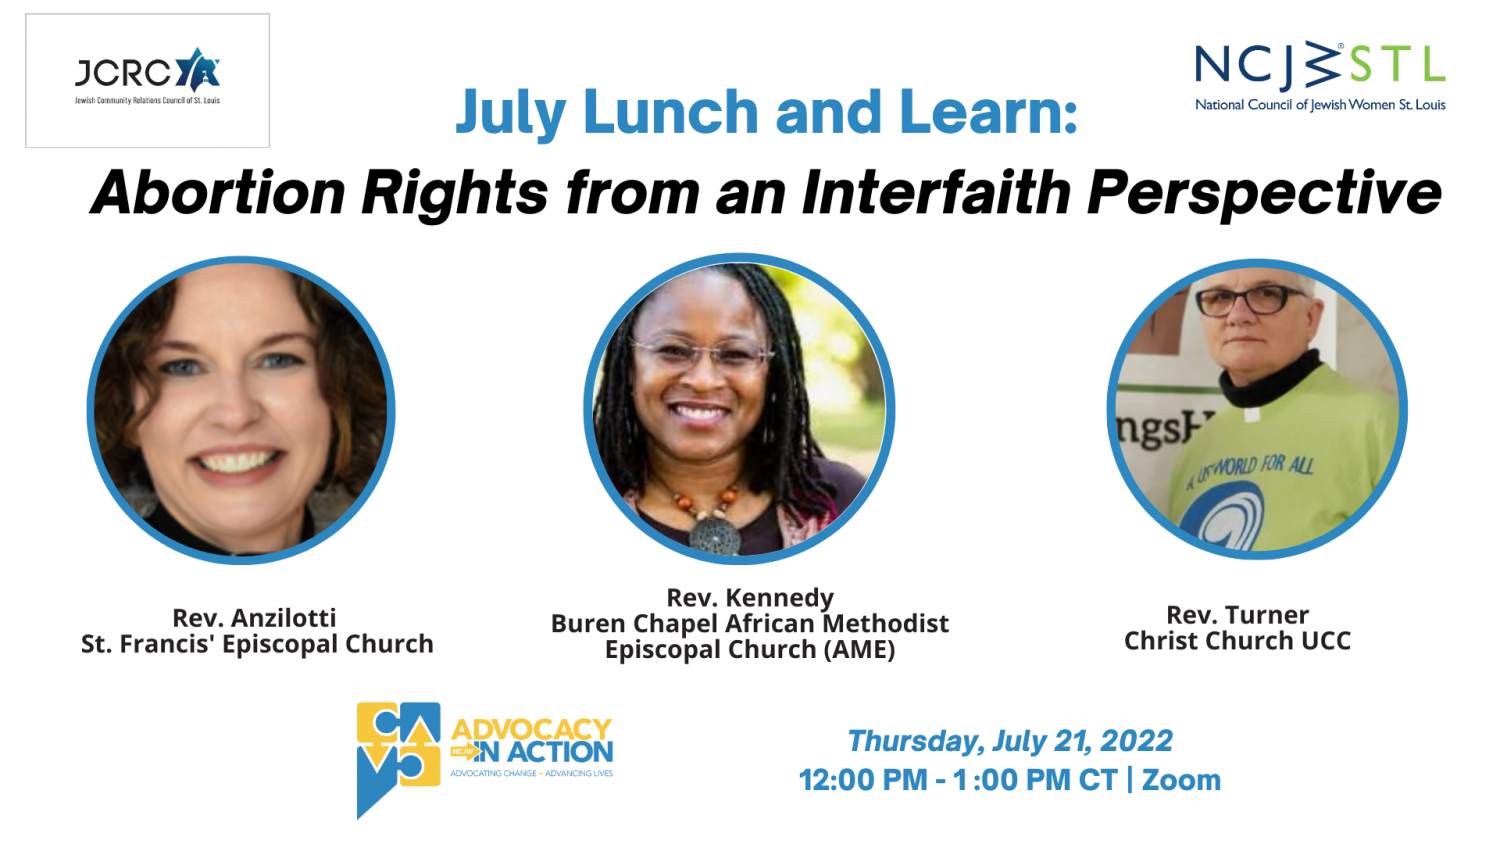 July 2022 Lunch and Learn graphic with title "Abortion Rights from an Interfaith Perspective" and headshots of Rev. Anzilotti, Rev. Kennedy, and Rev. Turner